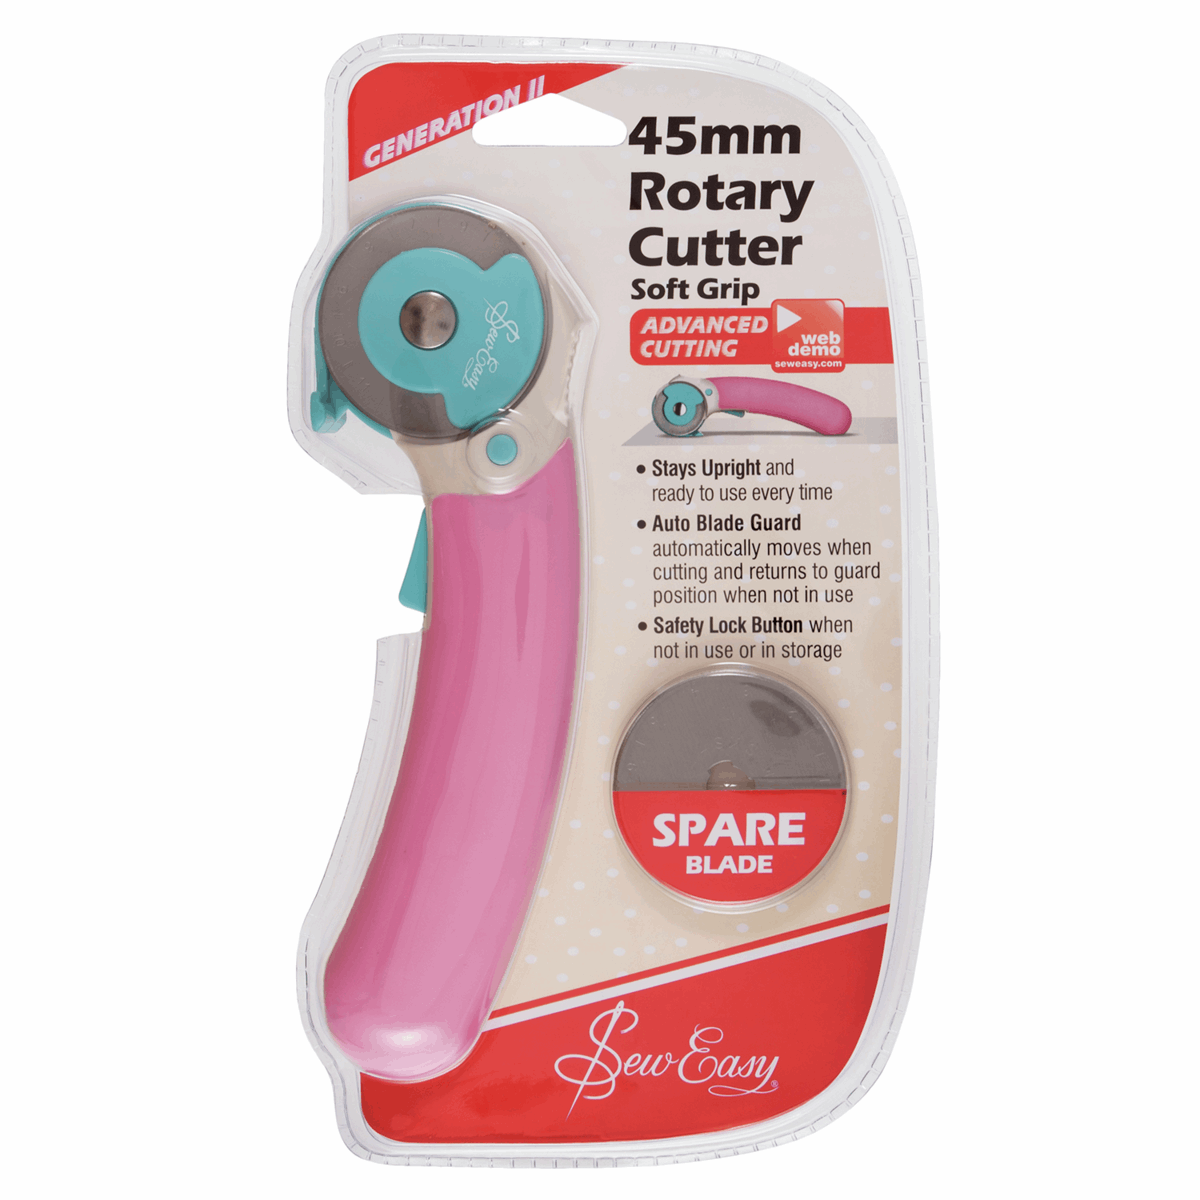 Sew Easy Rotary Cutter - 45mm